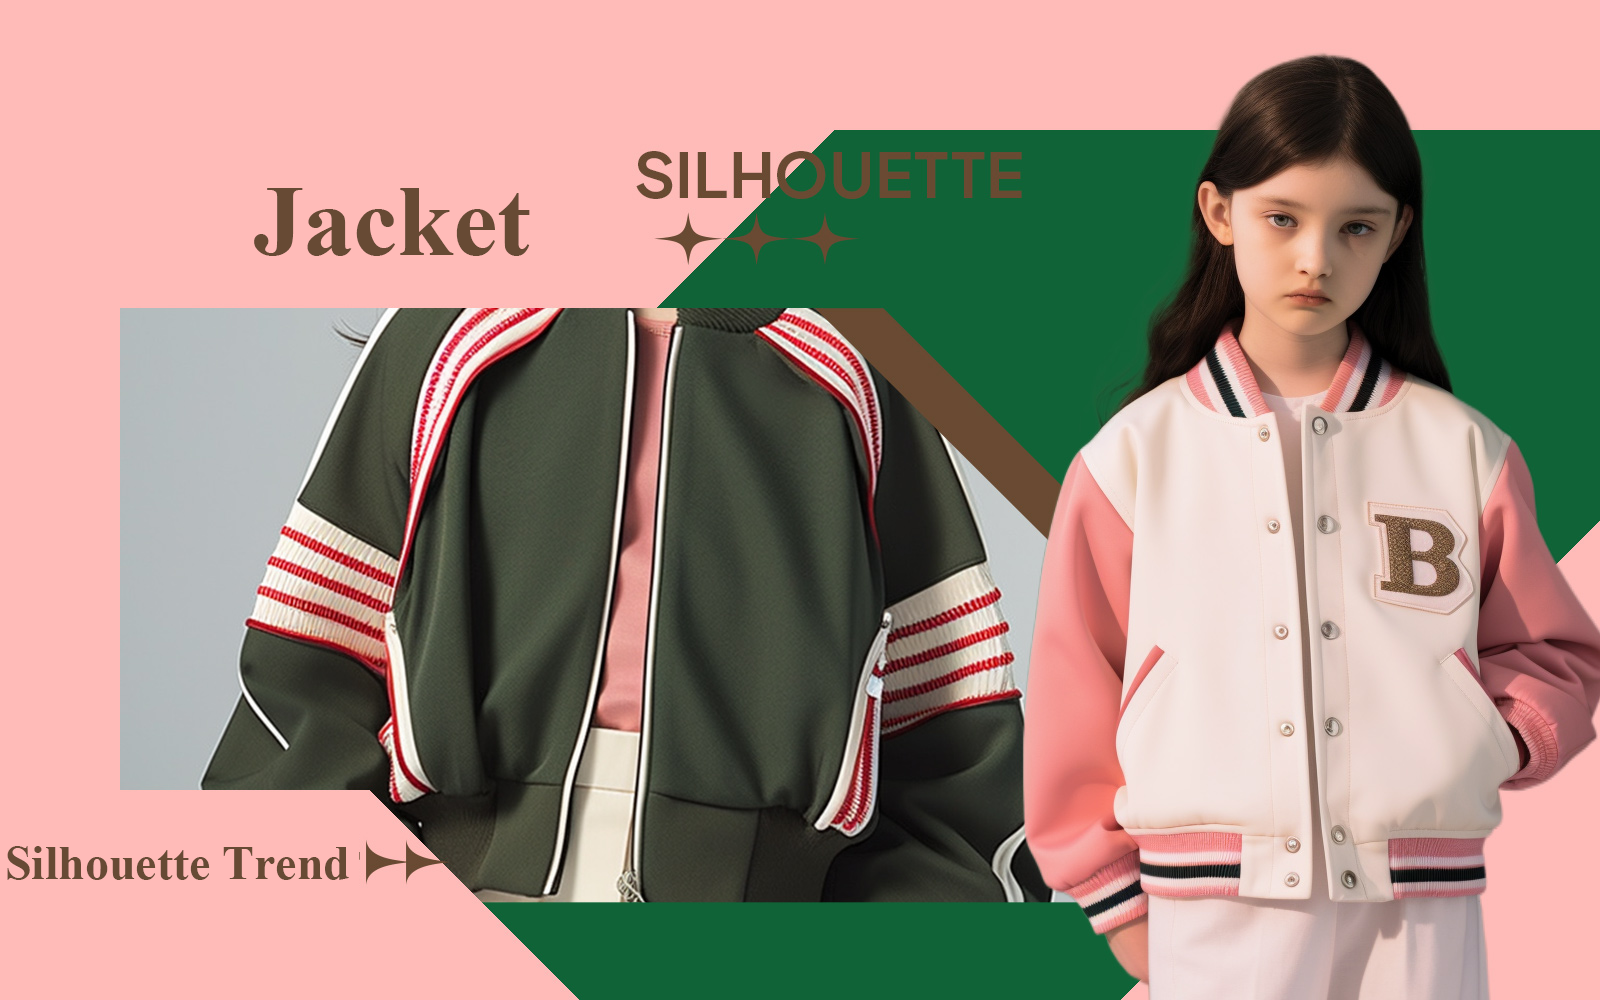 Jacket -- The Silhouette Trend for Girlswear